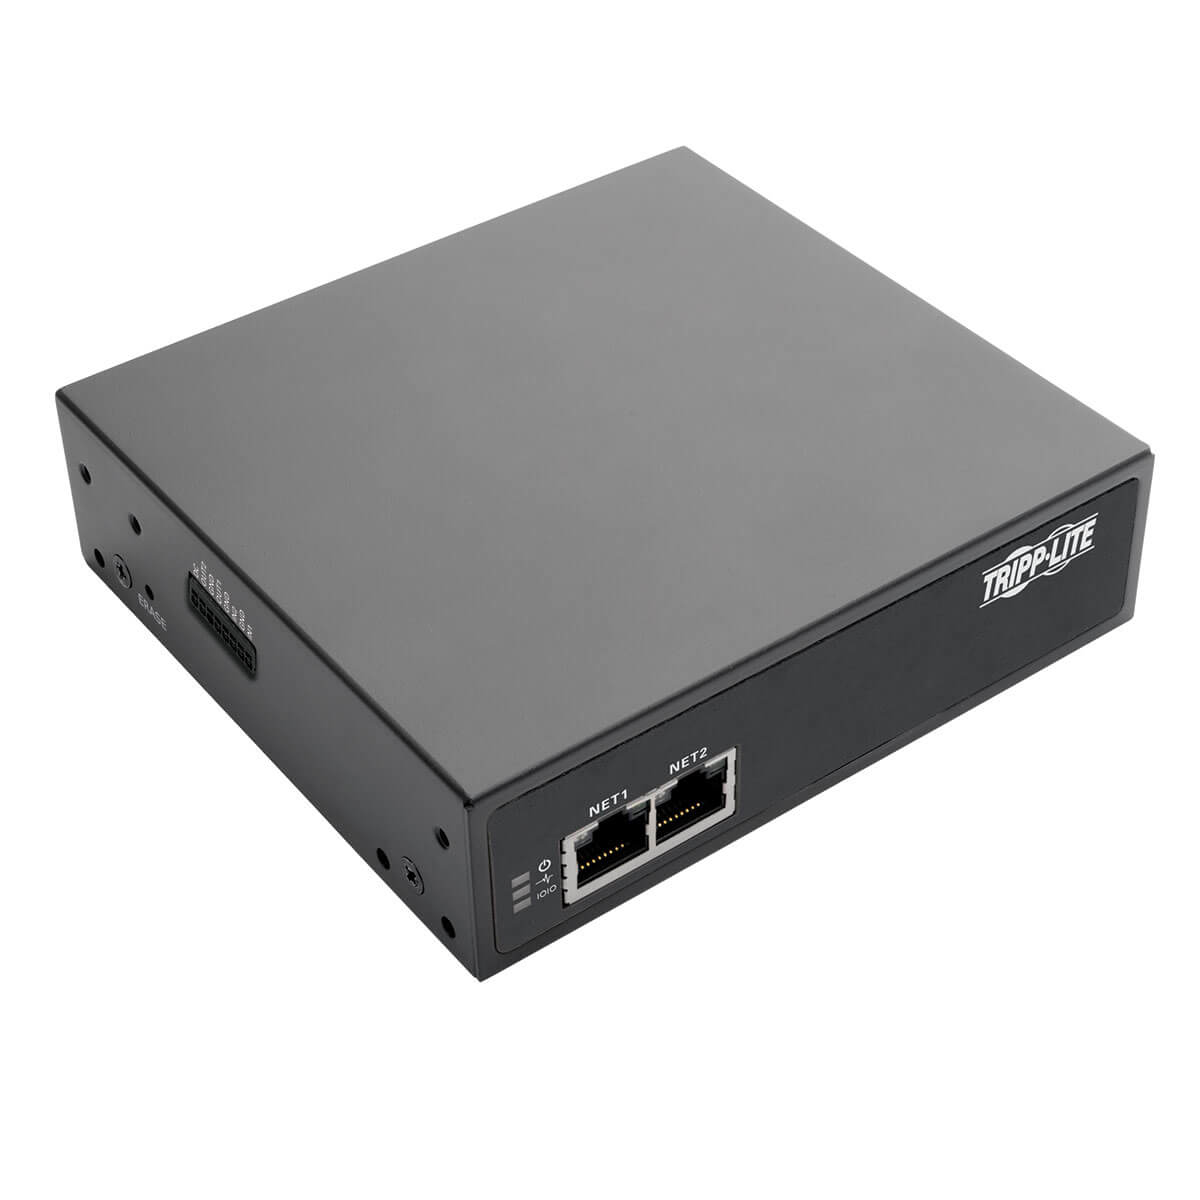 Tripplite - Cables And Connectiv 8-port Serial Console Server        Dual Gbe Nic 4gb 4usb Ports         B093-008-2e4u